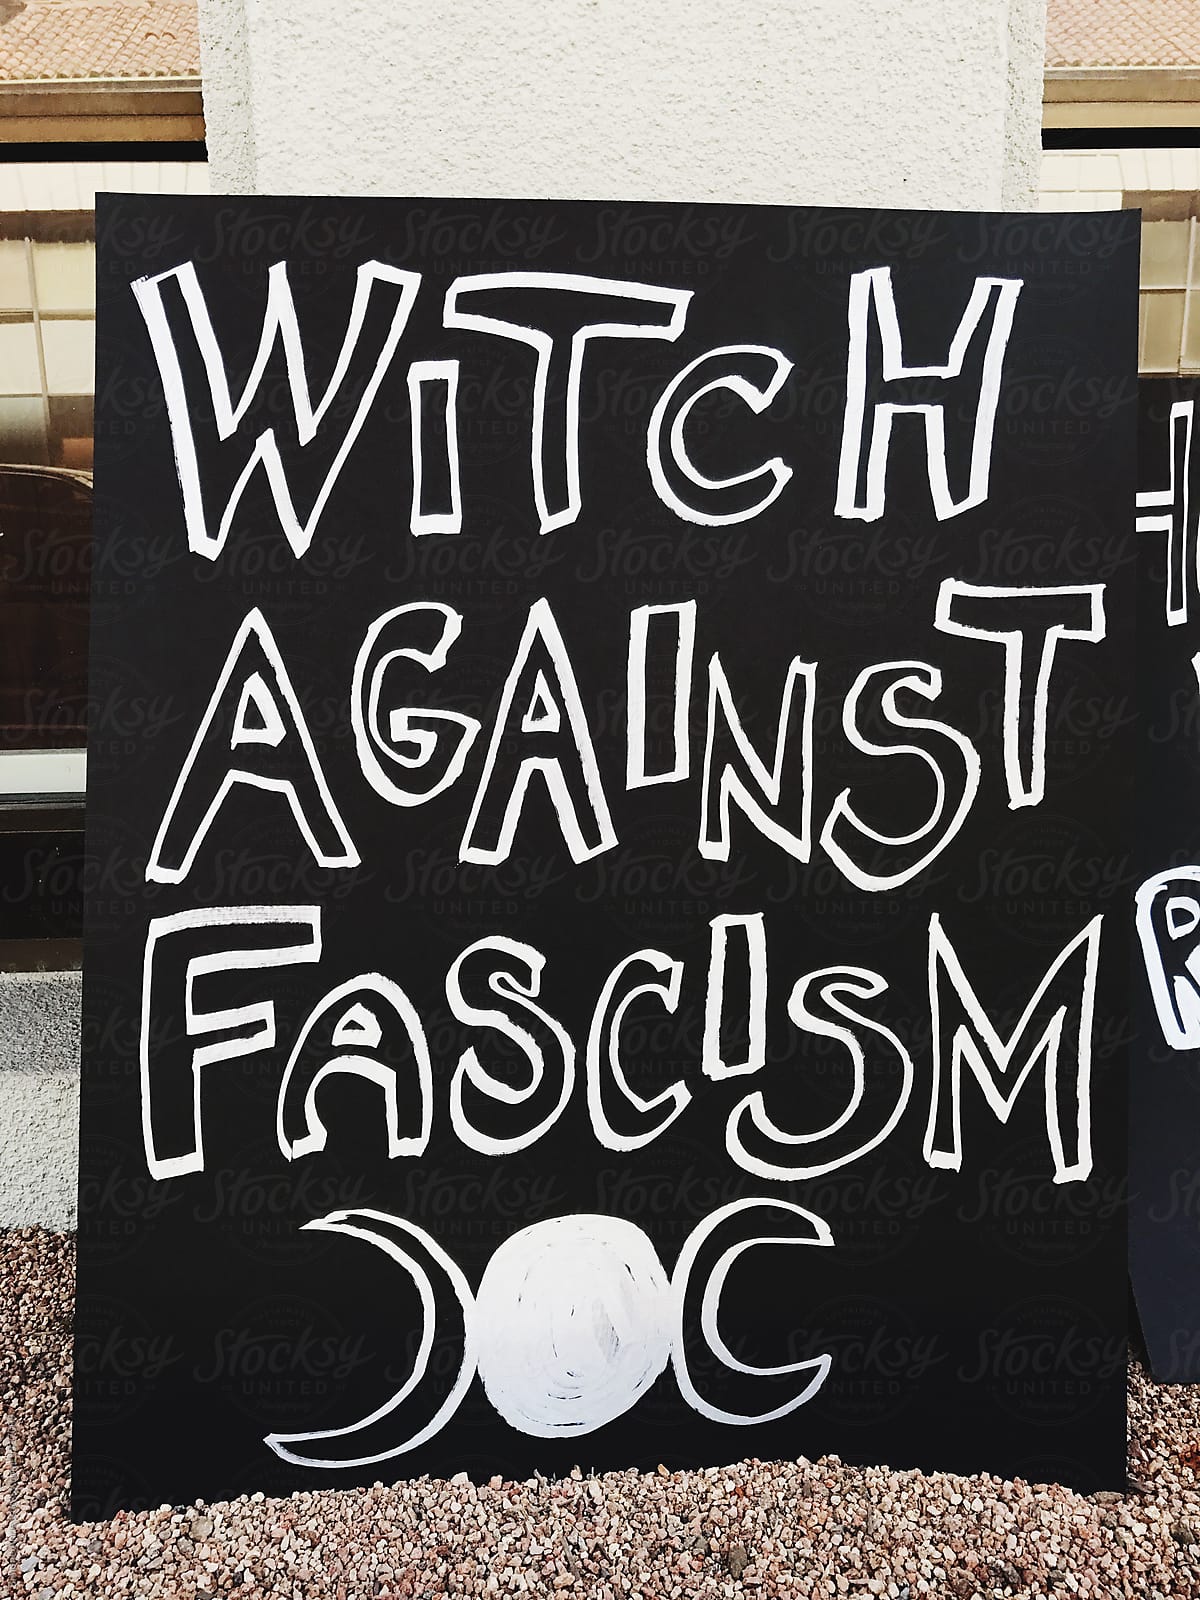 Witch against facism protest sign